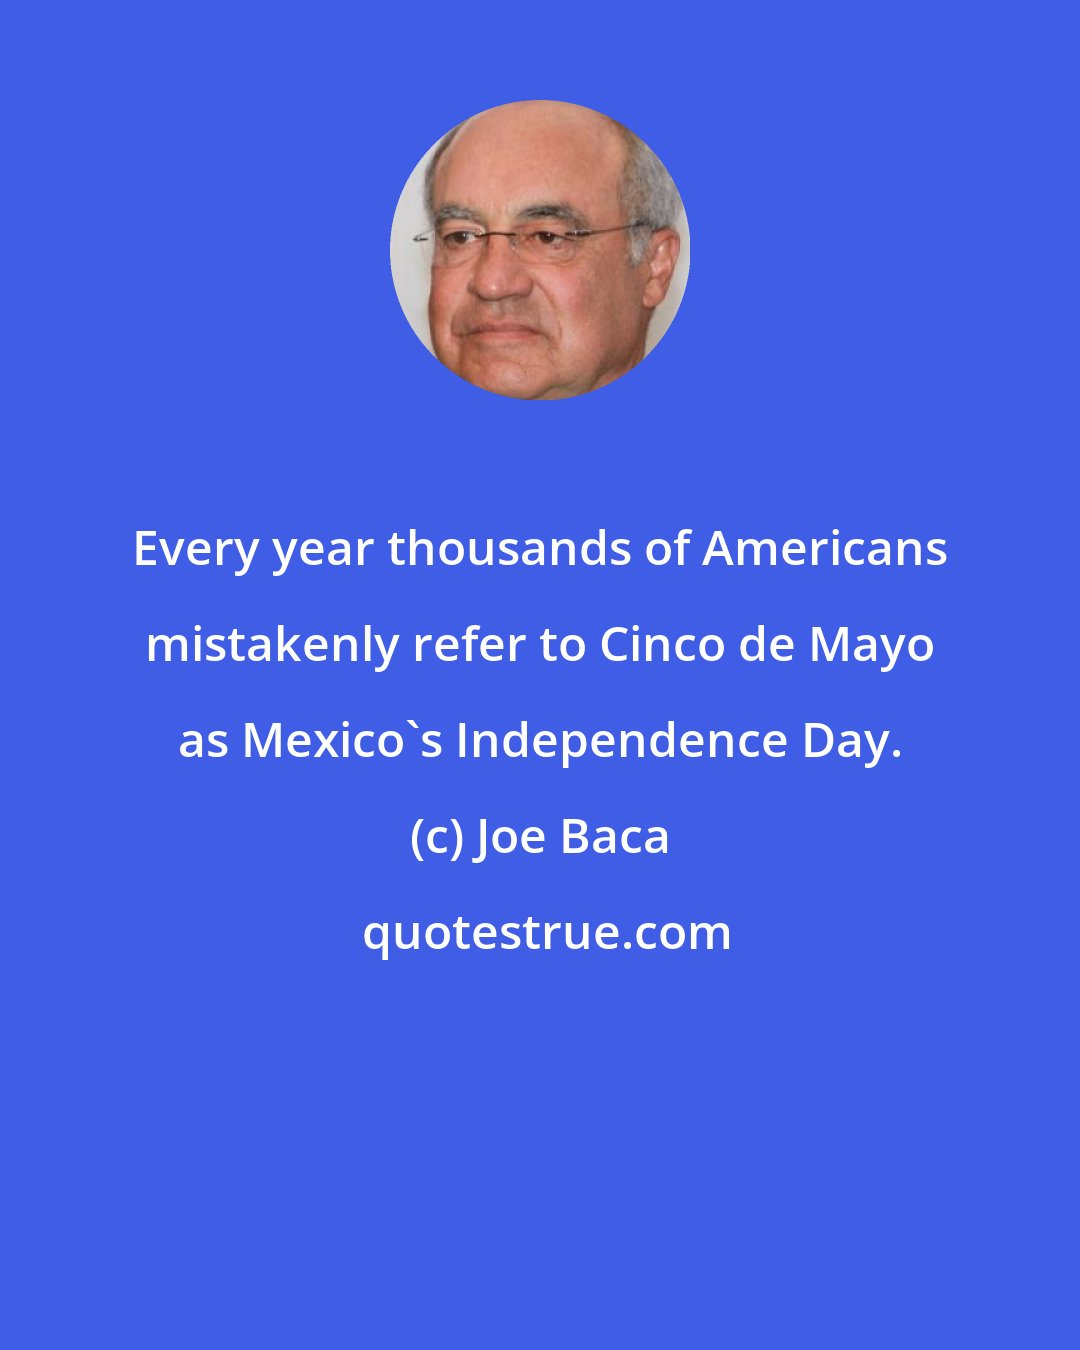 Joe Baca: Every year thousands of Americans mistakenly refer to Cinco de Mayo as Mexico's Independence Day.